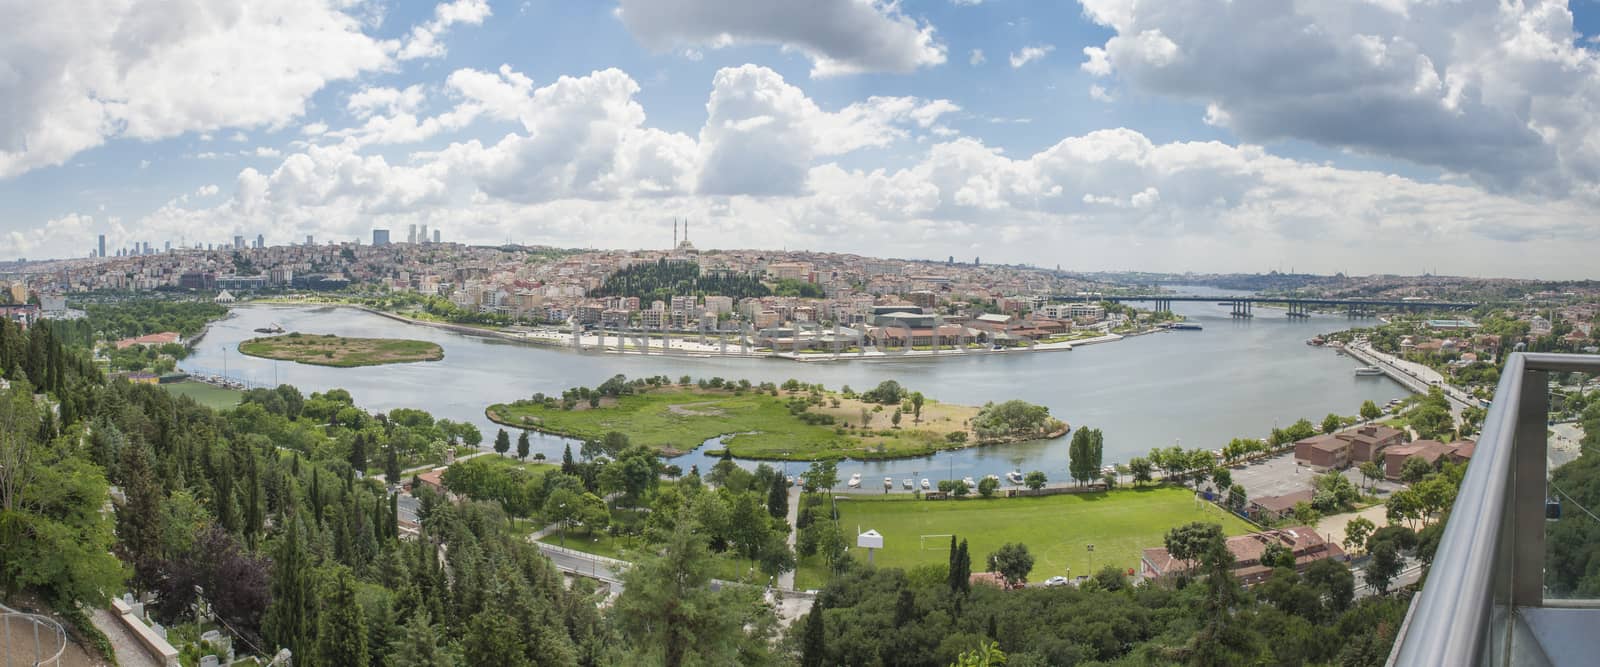 Aerial panoramic view over the Bosphorus river and Istanbul Turkey from the famous Pierre Loti Cafe